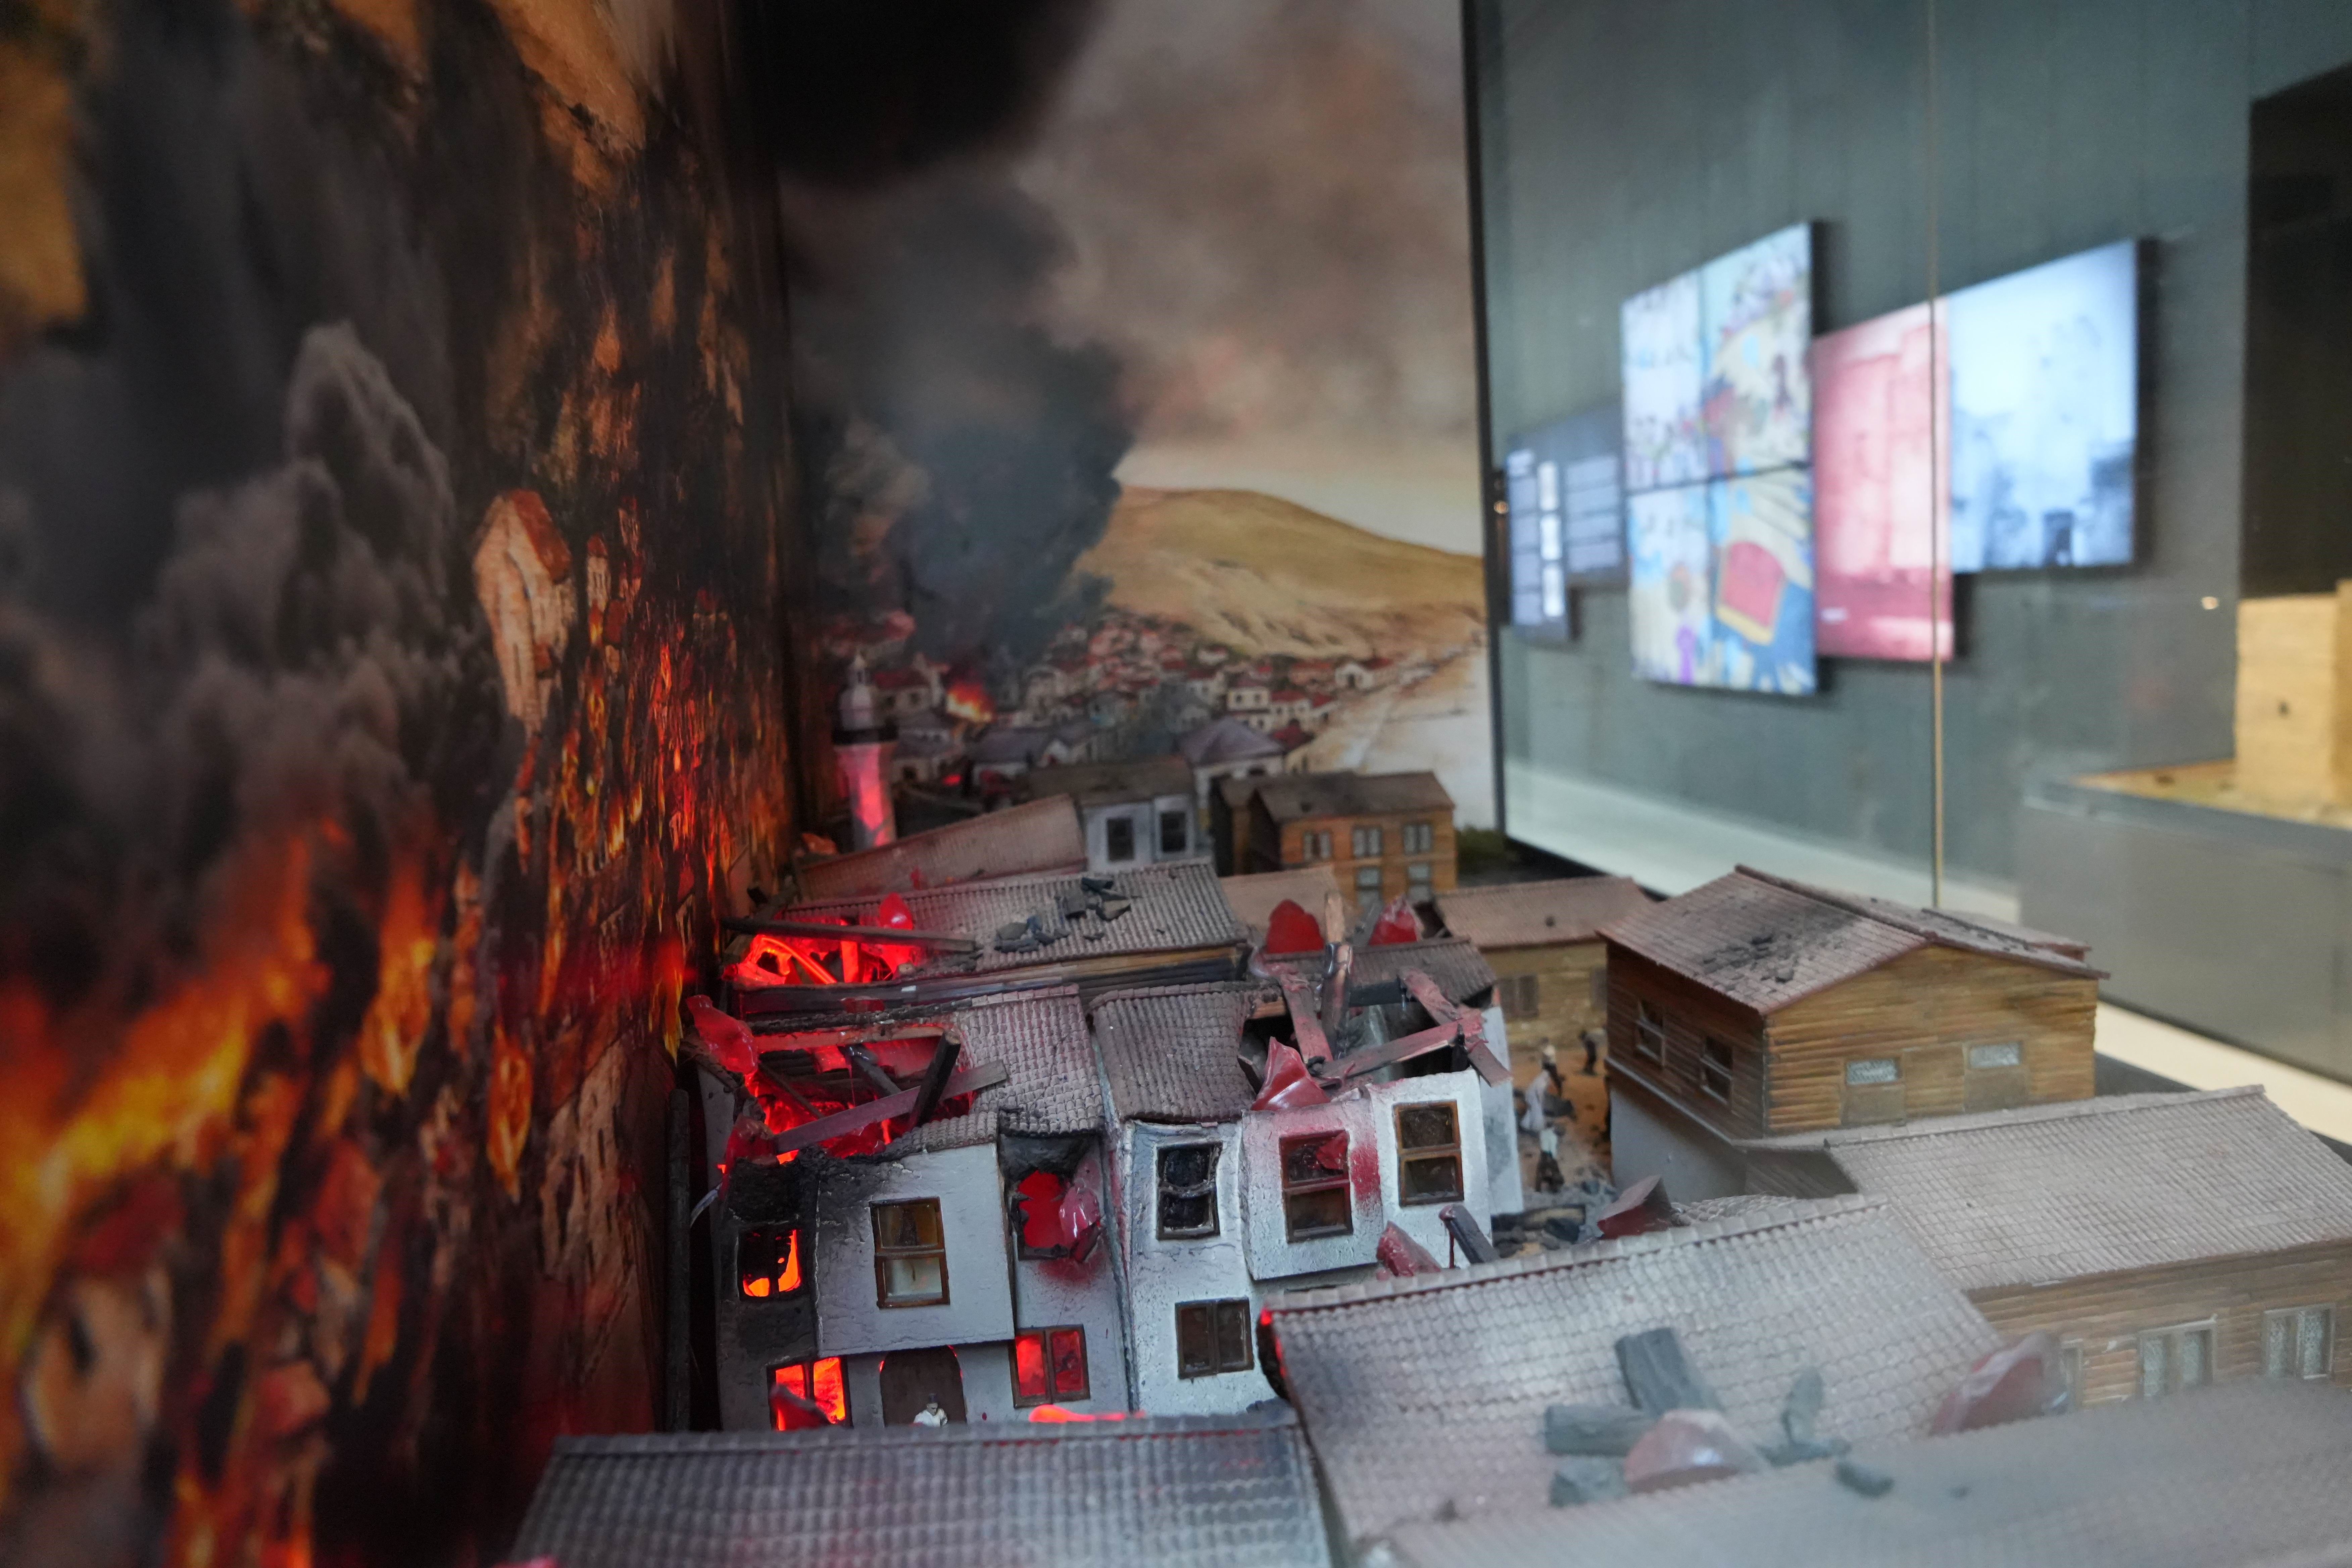 Samsun Museum exhibition chronicles 500 houses burned in fire 155 years ago